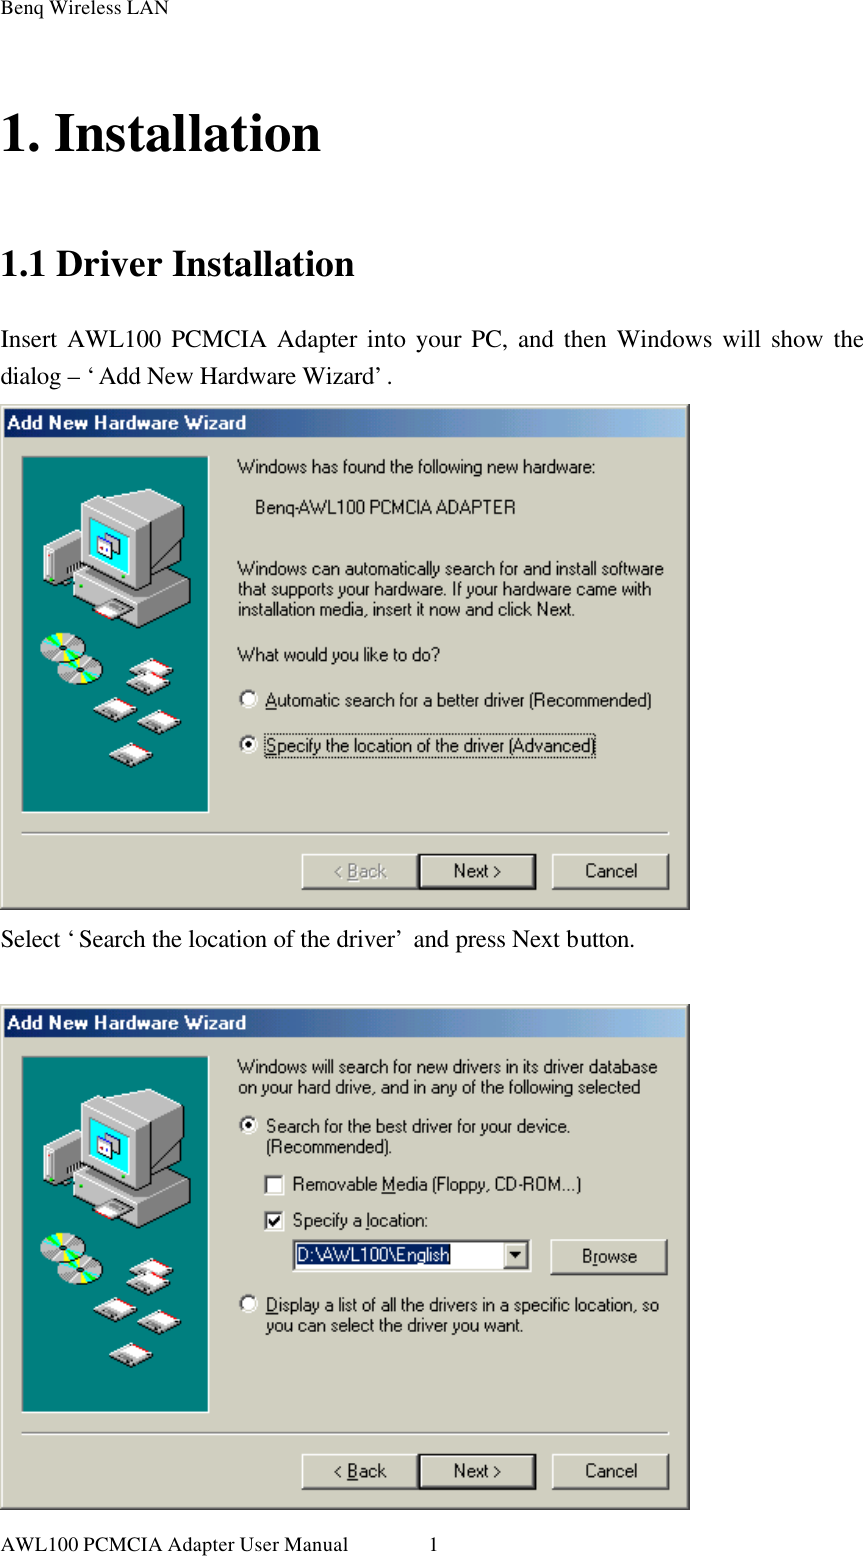 Benq Wireless LAN AWL100 PCMCIA Adapter User Manual 11. Installation 1.1 Driver Installation Insert AWL100 PCMCIA Adapter into your PC, and then Windows will show the dialog – ‘Add New Hardware Wizard’.  Select ‘Search the location of the driver’ and press Next button.   